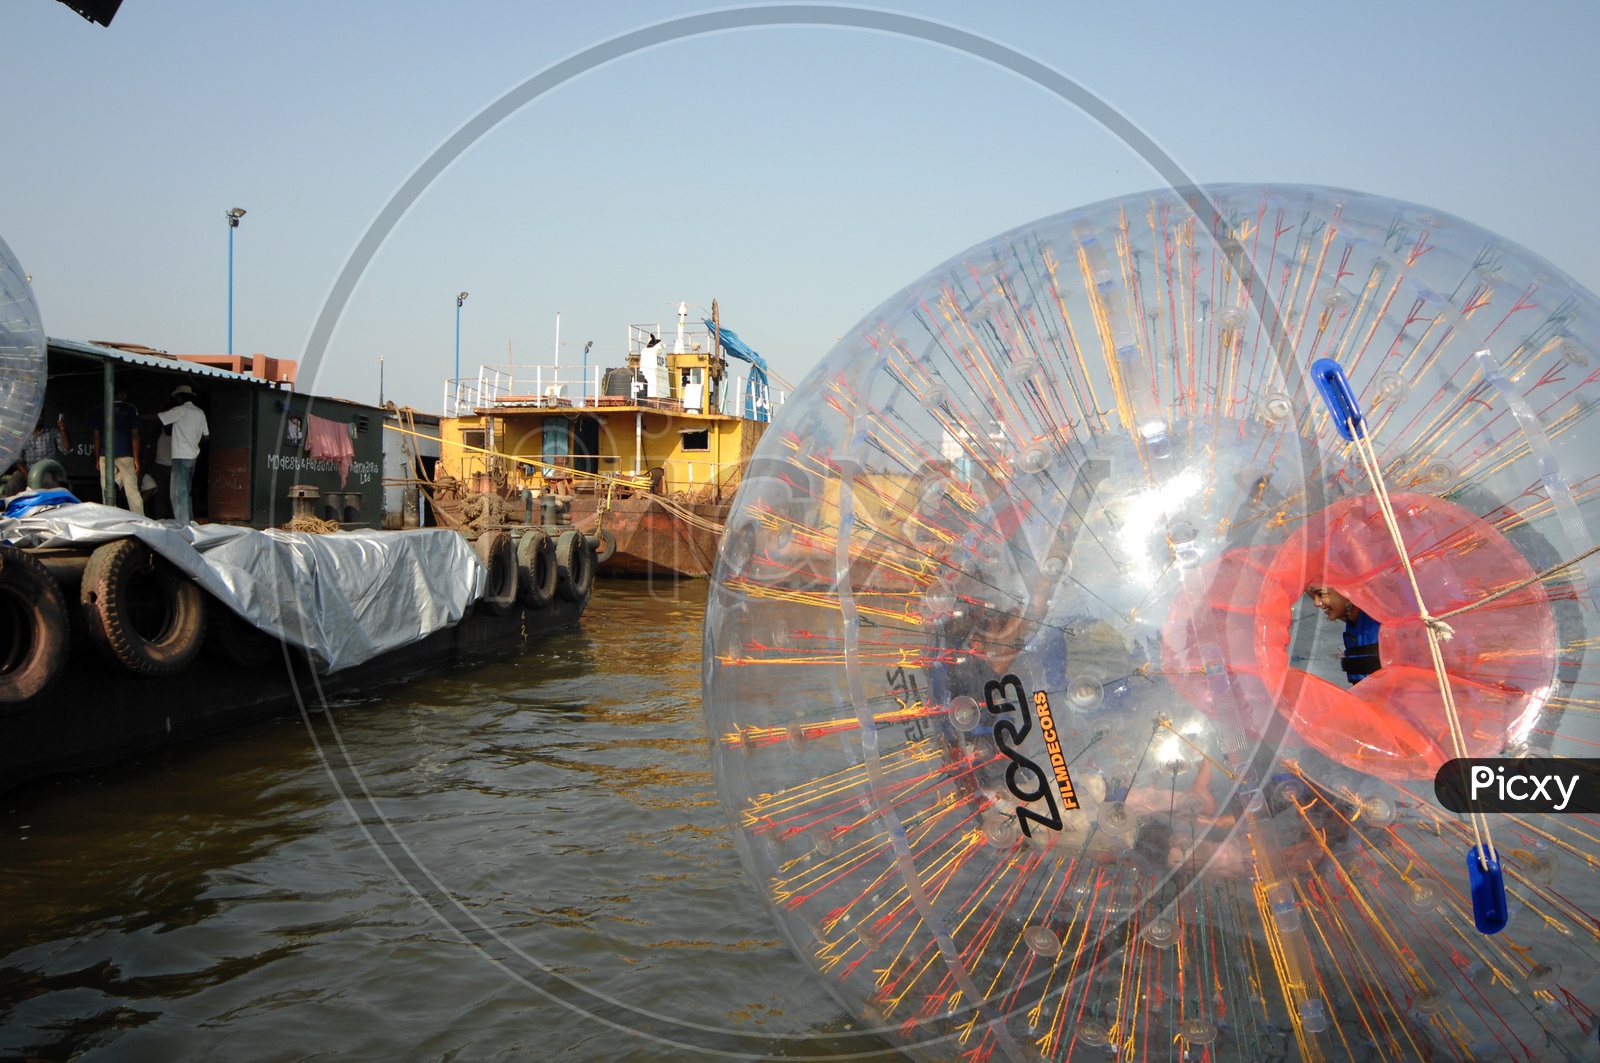 Bubble Roller  Rides on Sea Water